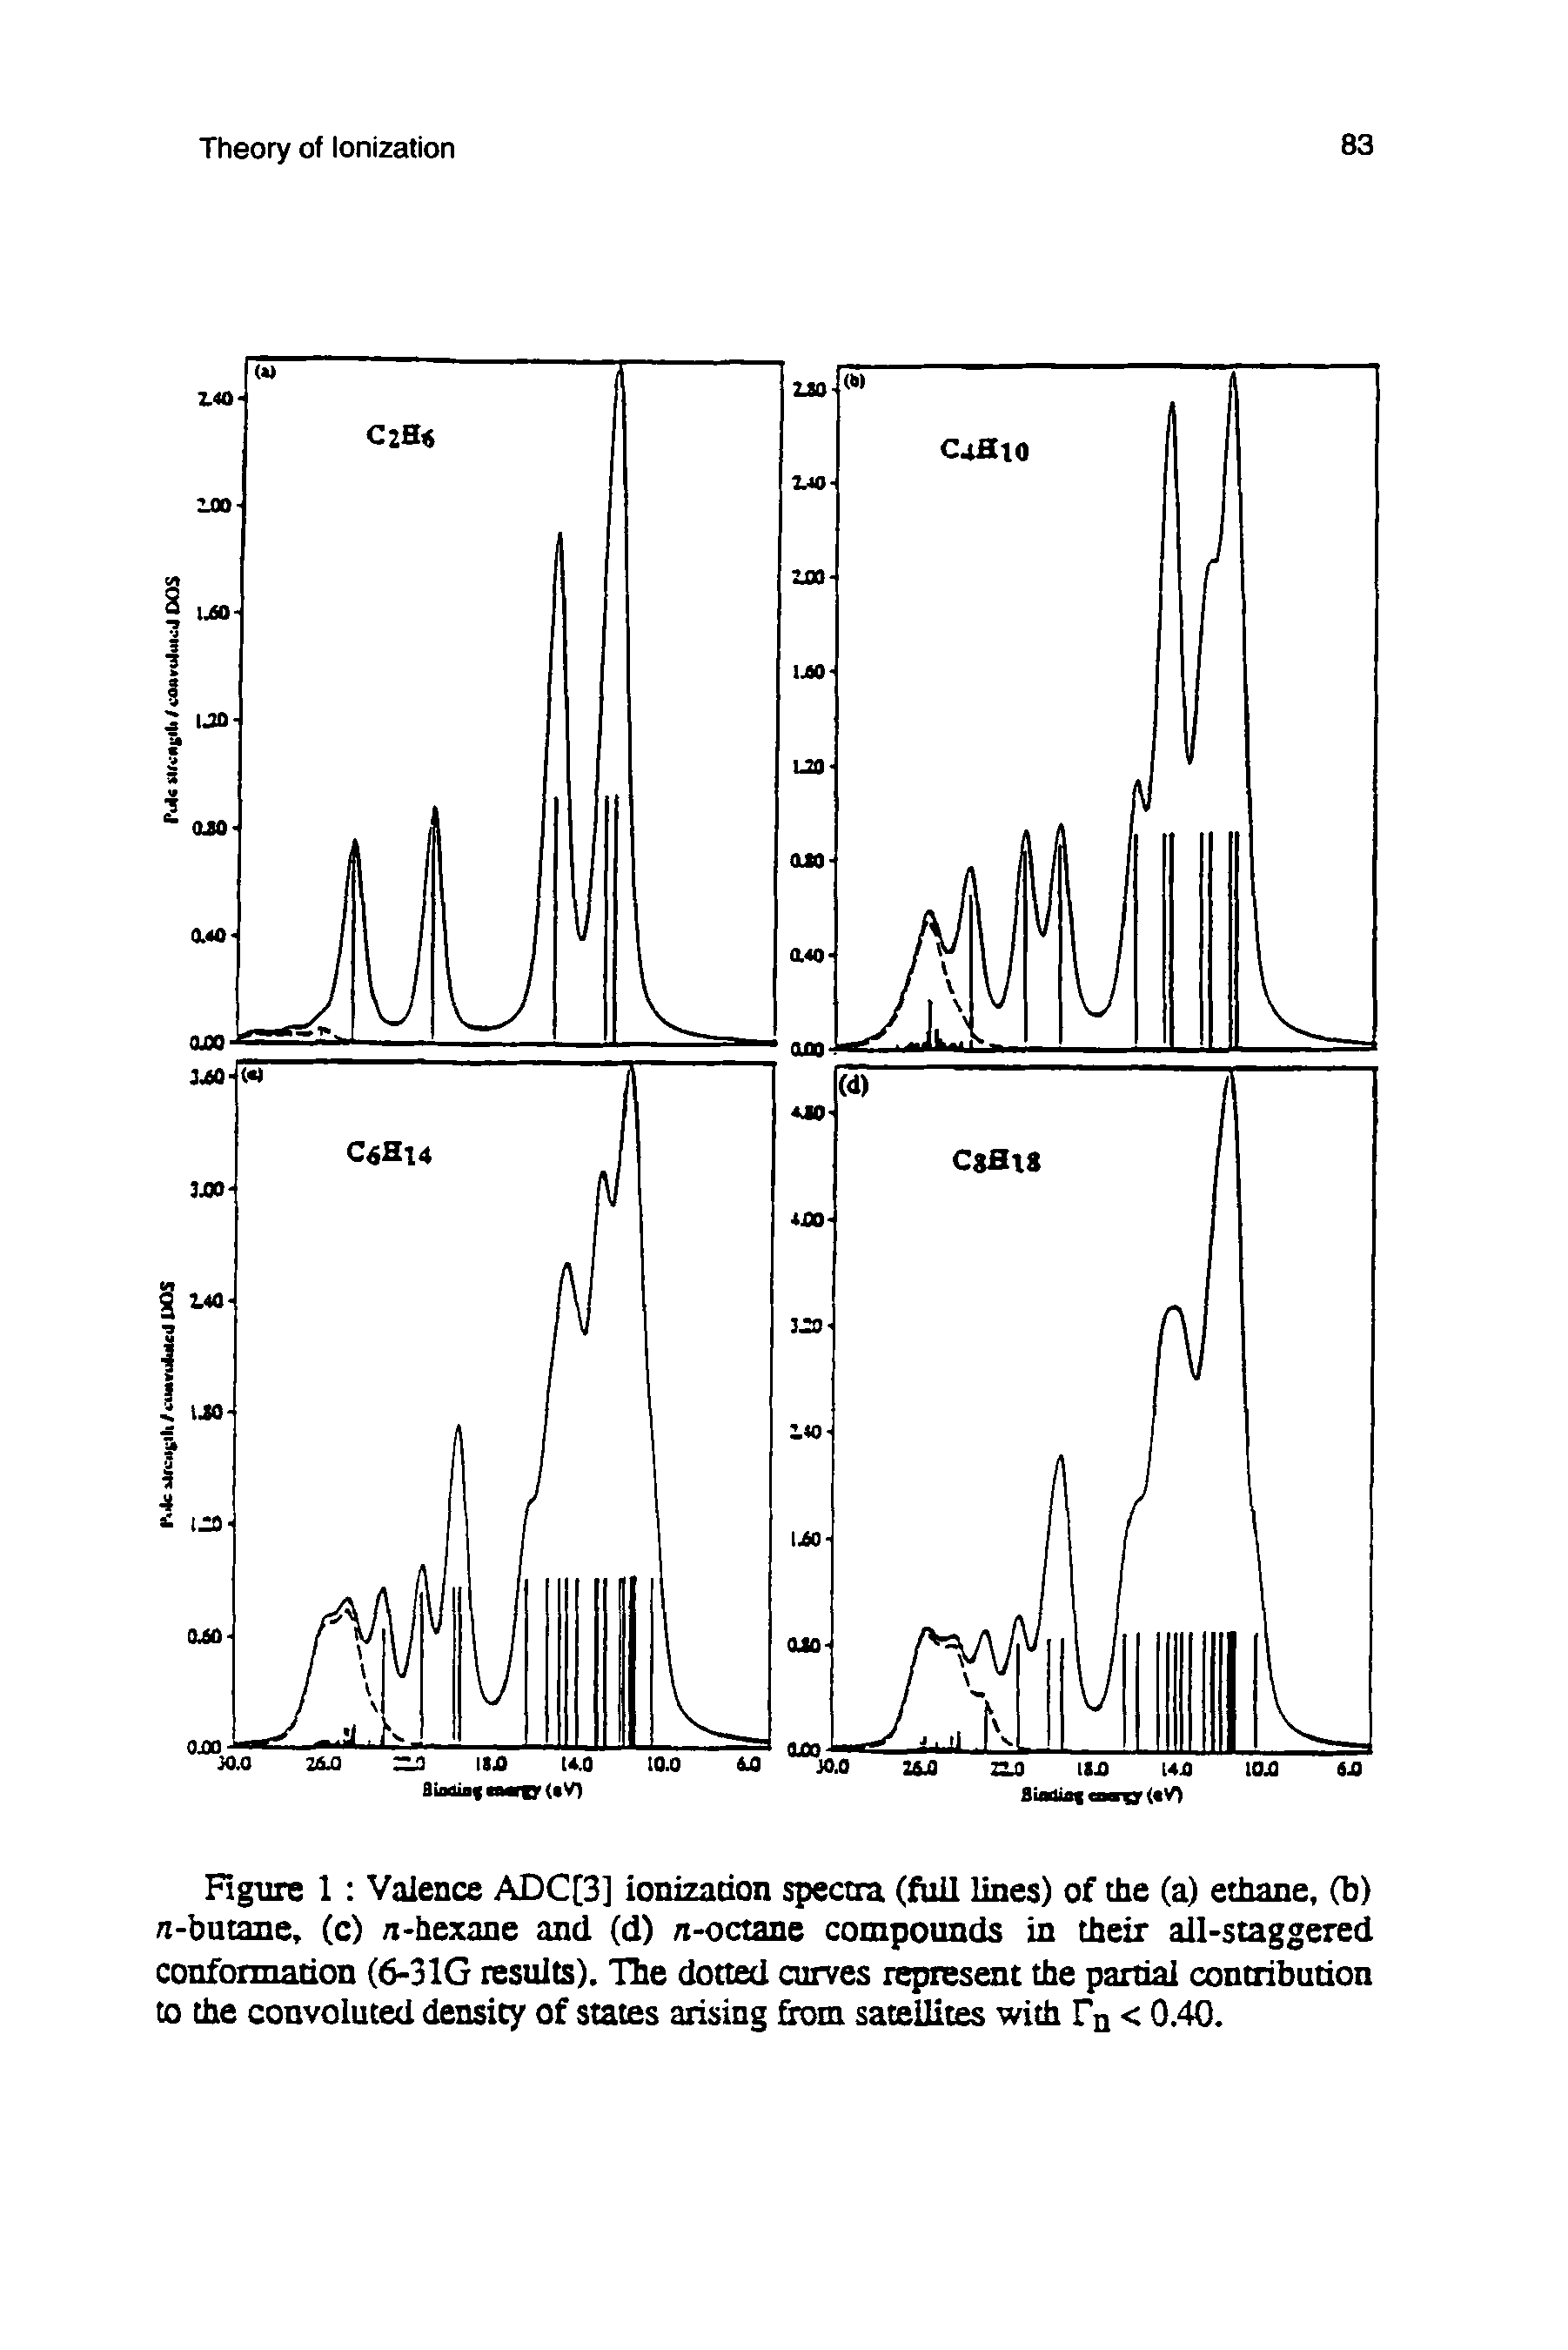 Figure 1 Valence ADC[3] ionizadon spectra (full lines) of the (a) ethane, (b) n-butane, (c) n-hexane and (d) n-octane compounds in their all-staggered confoimadon (6-31G results). Hie dotted curves represent the partial contribution to the convoluted density of states arising from sateilims with Fn < 0.40.